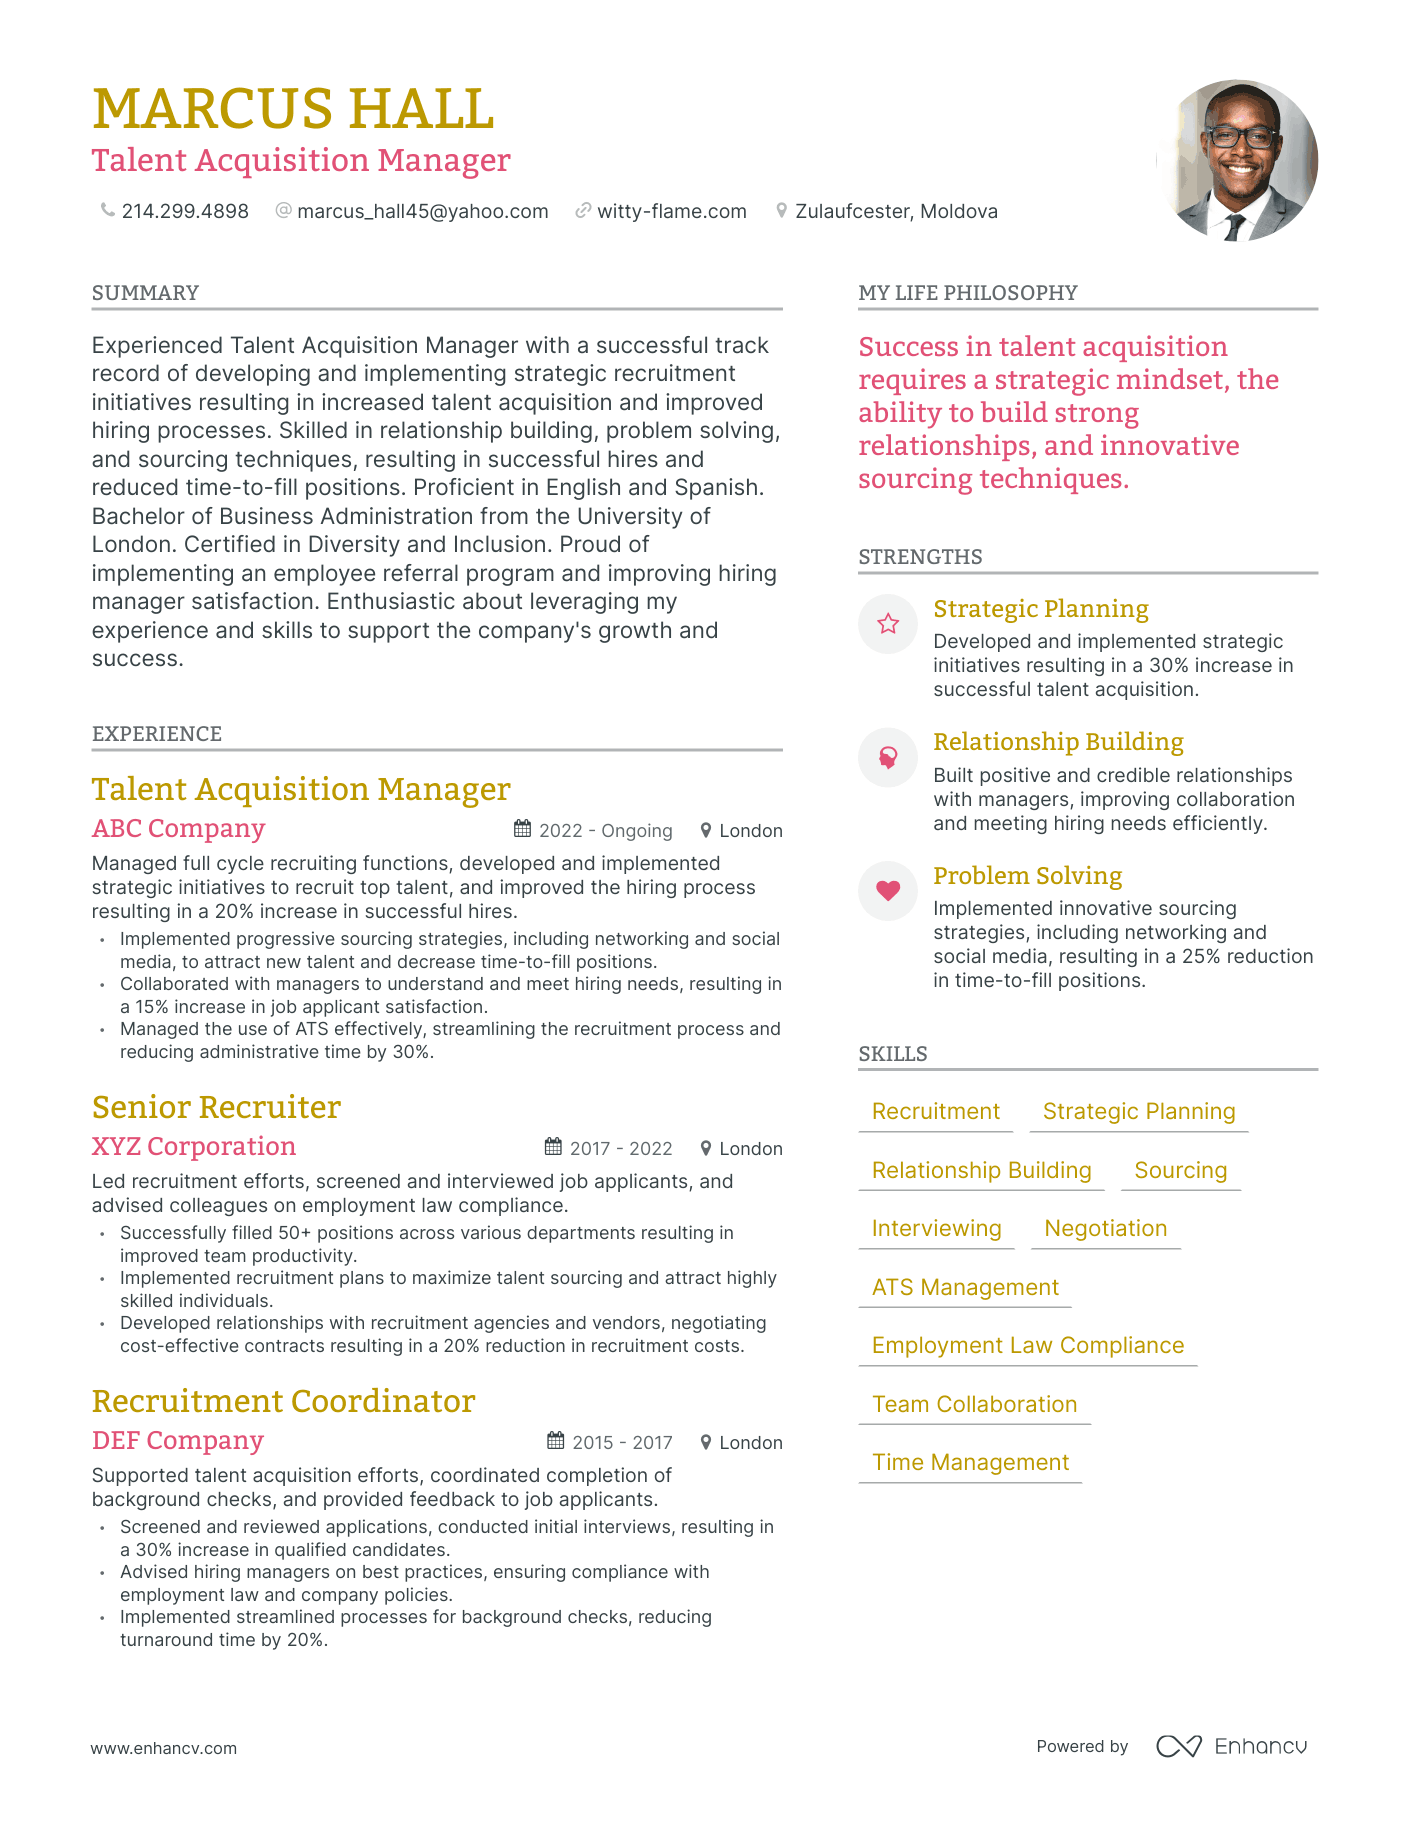 Talent Acquisition Manager resume example